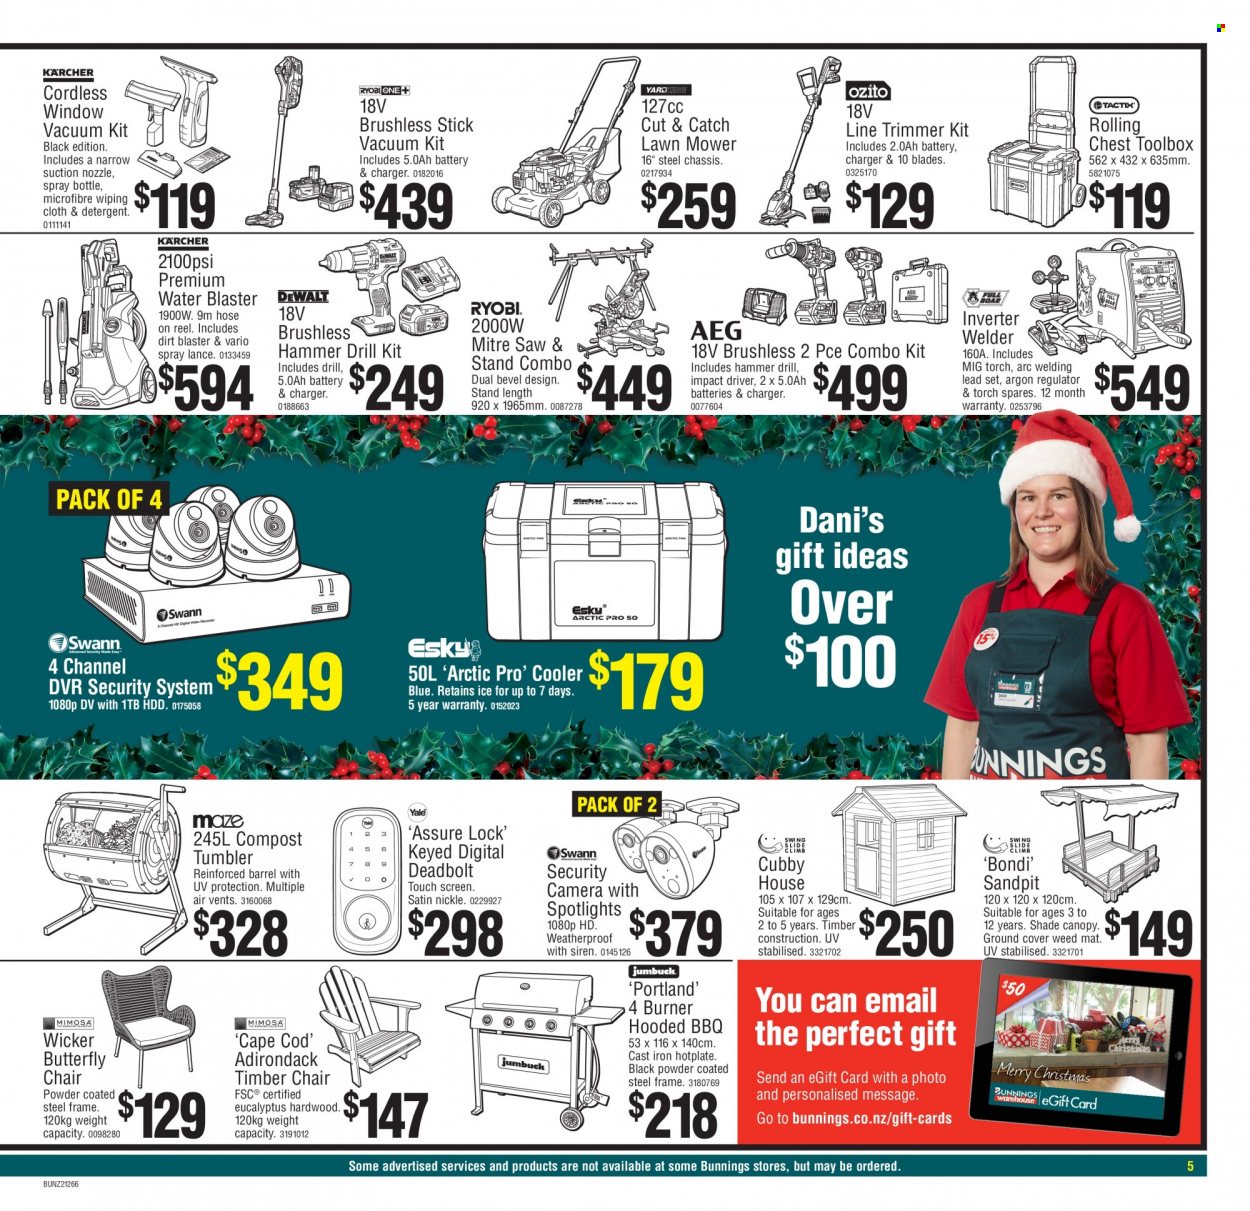 Bunnings Warehouse mailer  - 29.12.2021 - 29.12.2021. Page 5.